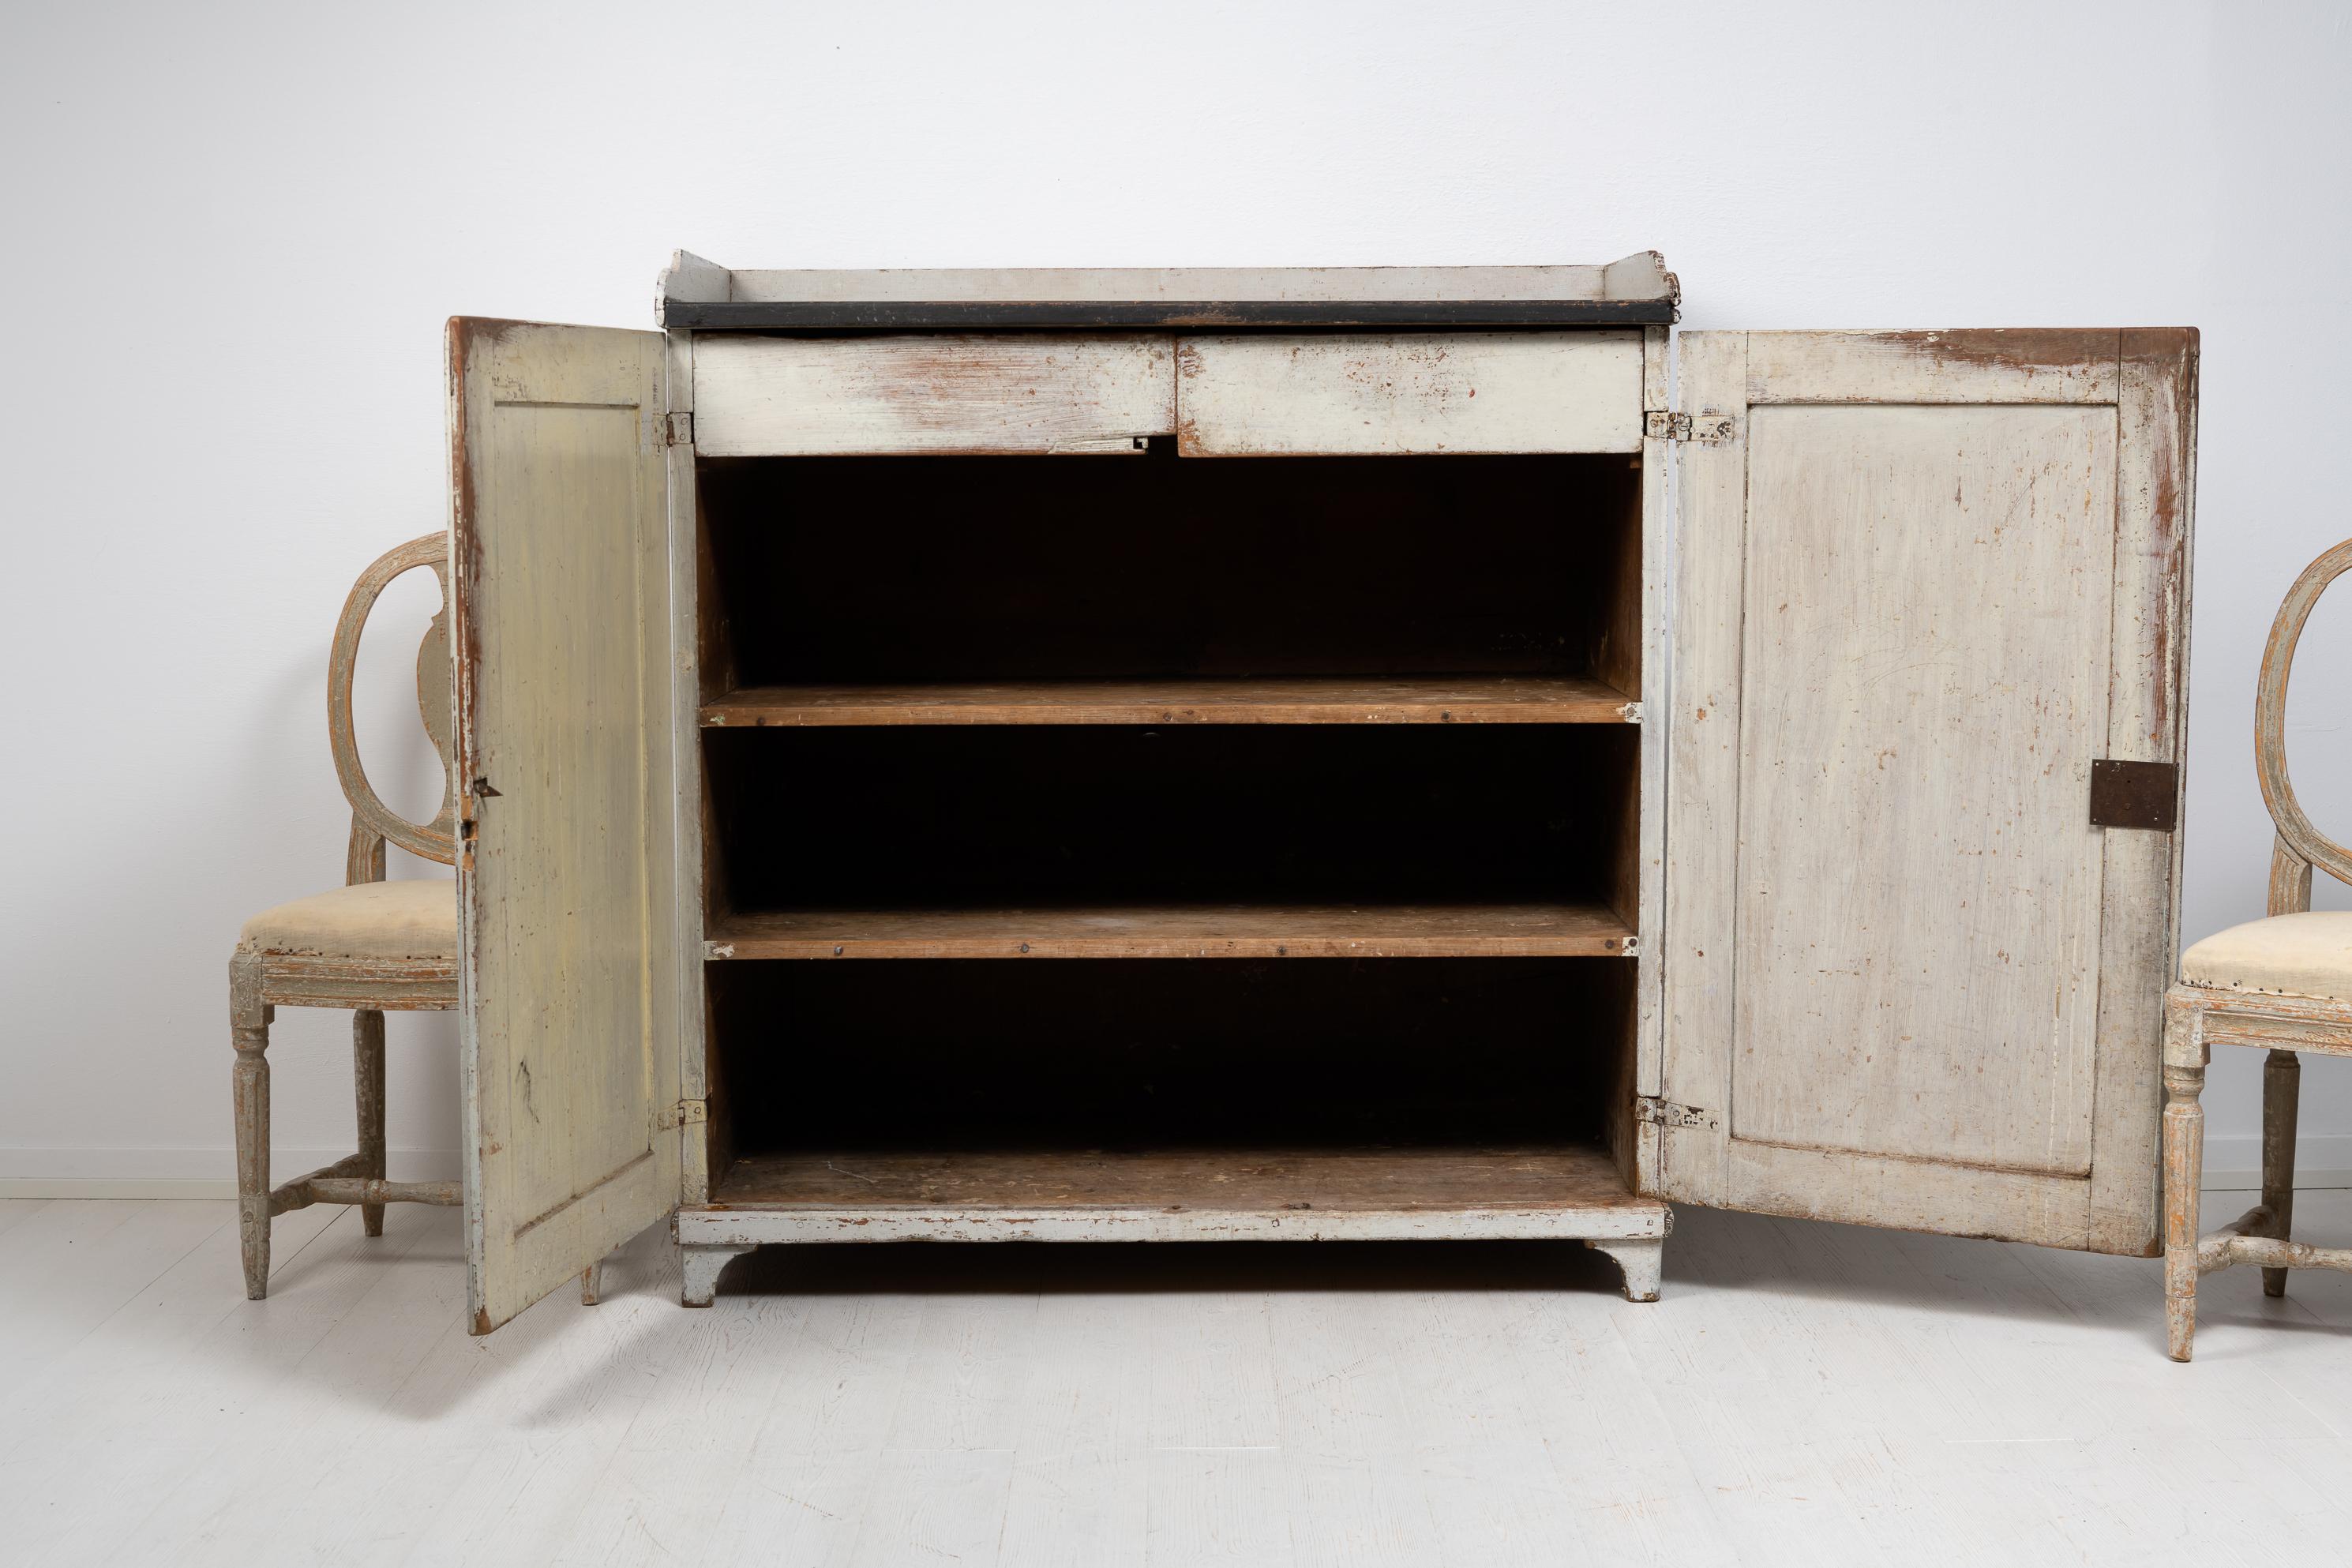 Hand-Crafted Northern Swedish Country Furniture Folk Art Sideboard For Sale